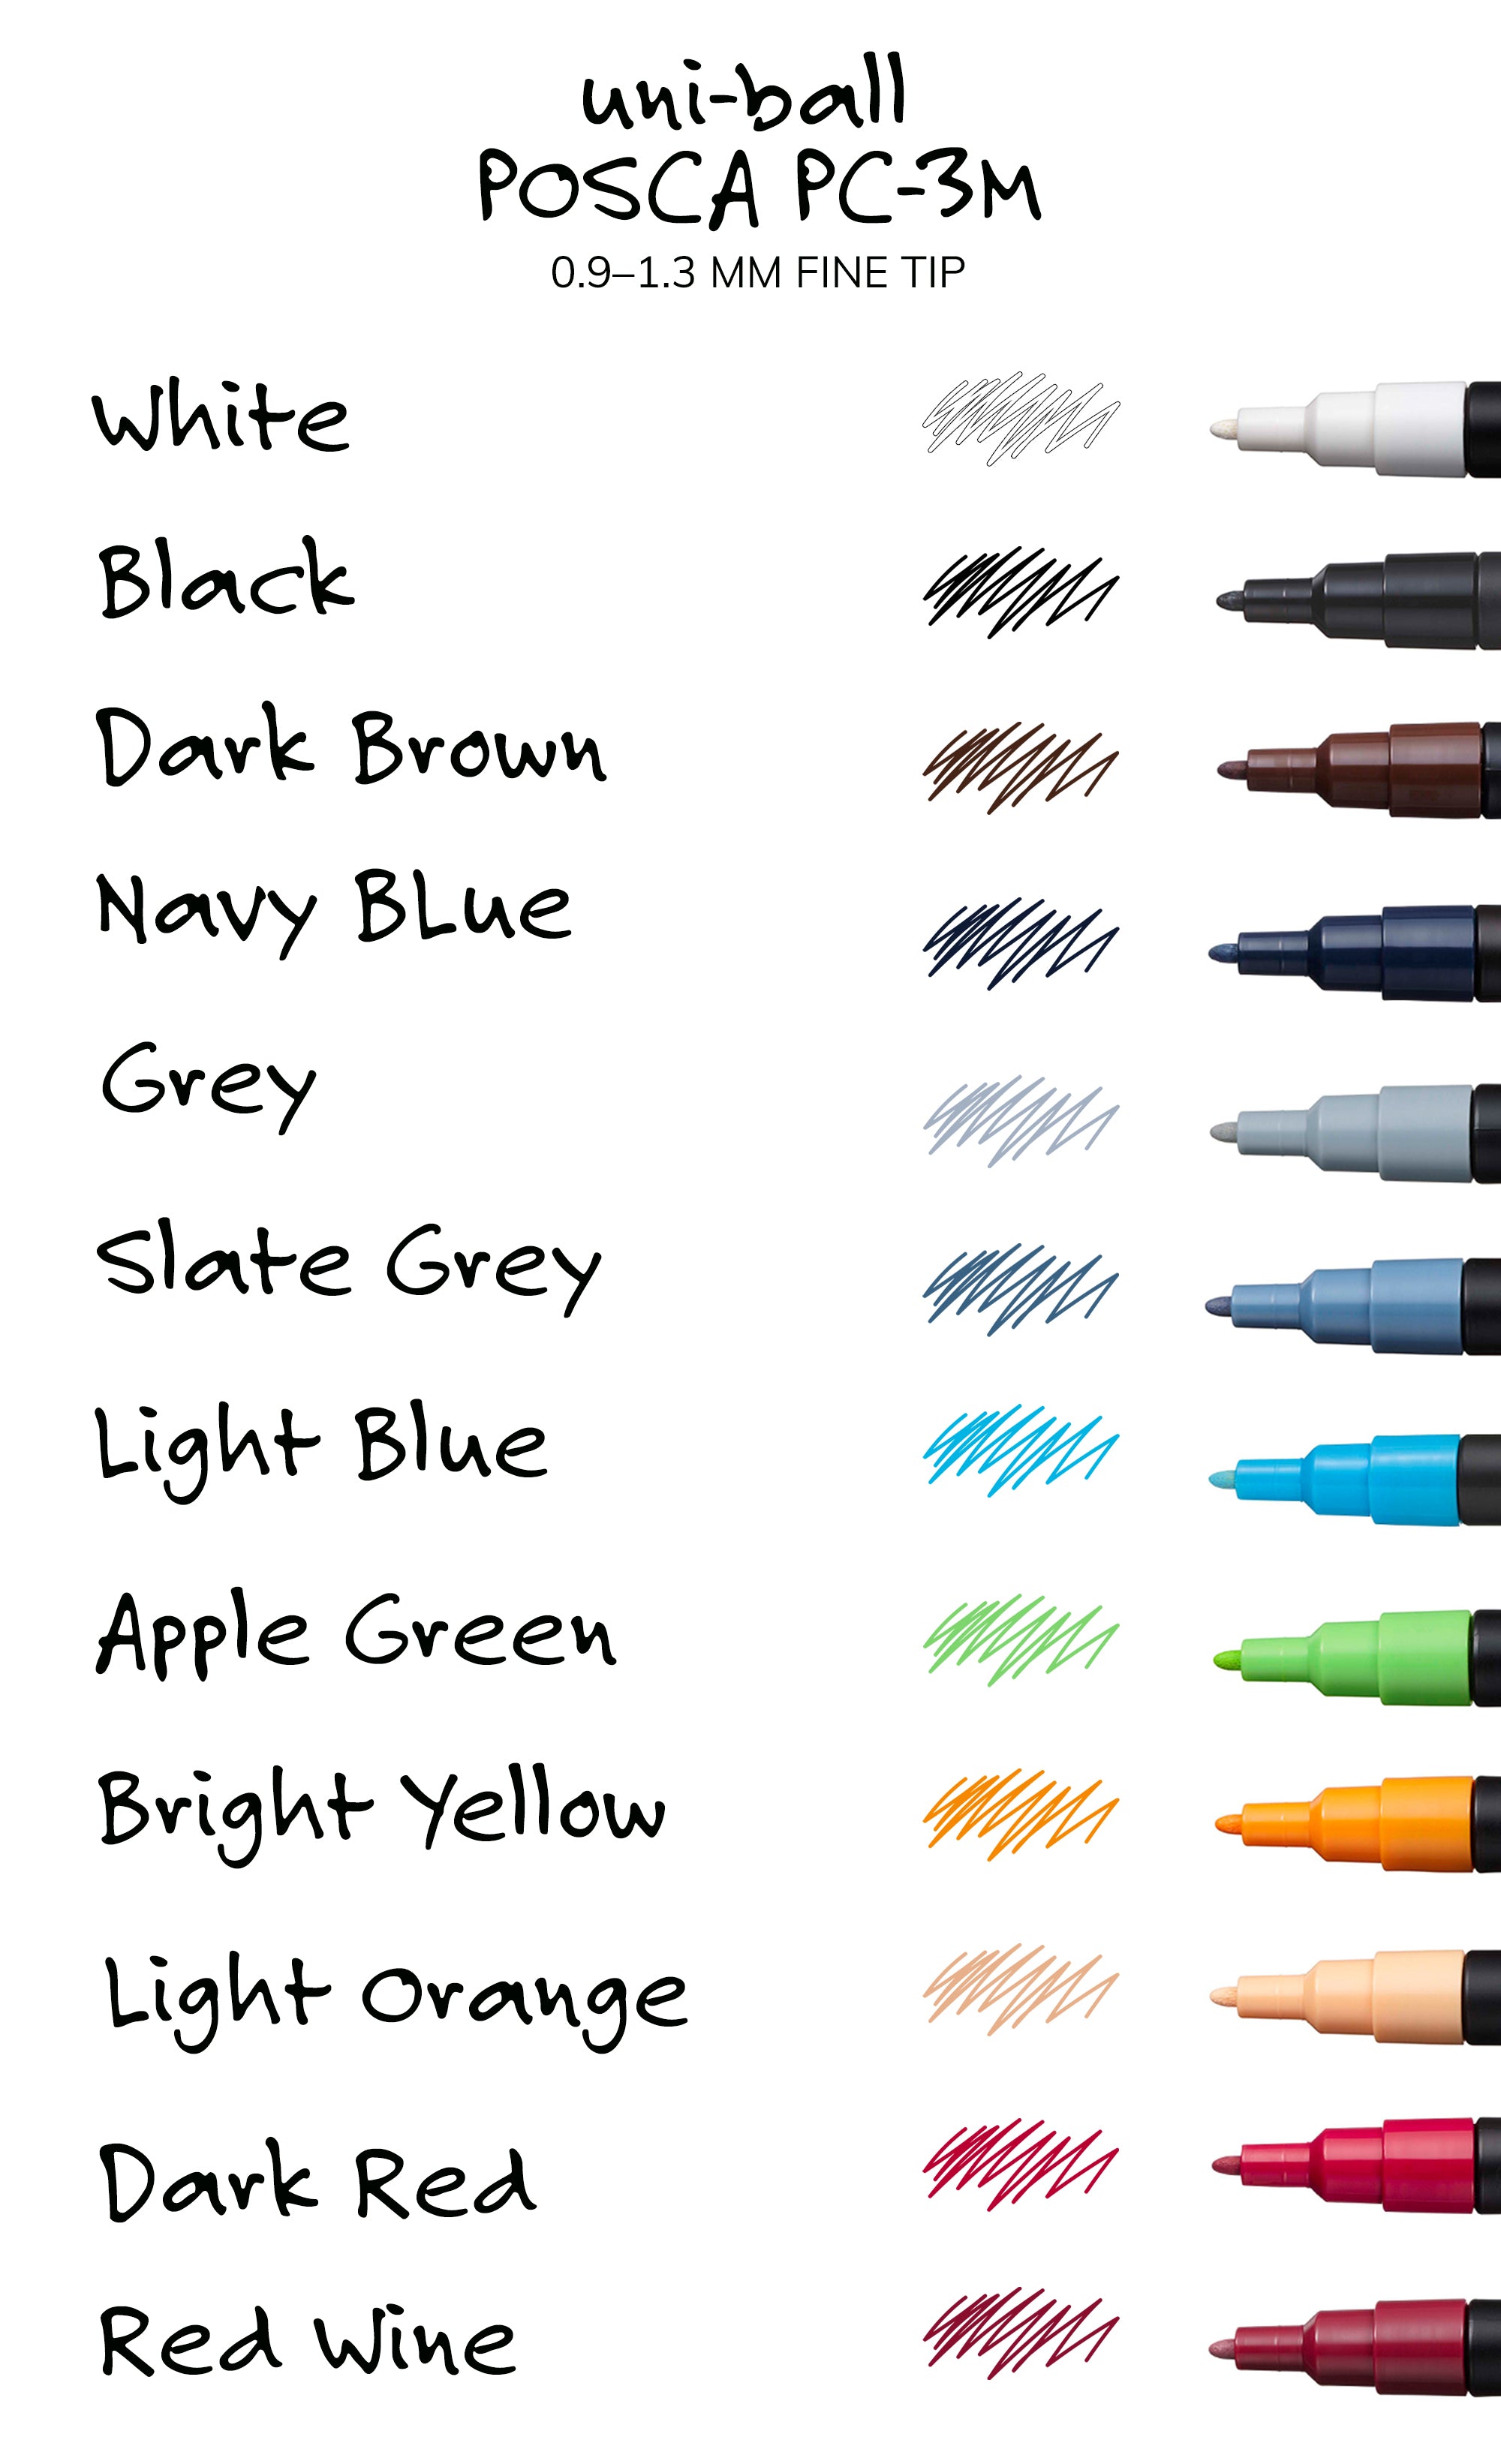 uni® POSCA® PC-3M, Water-Based Paint Markers (15 Pack)